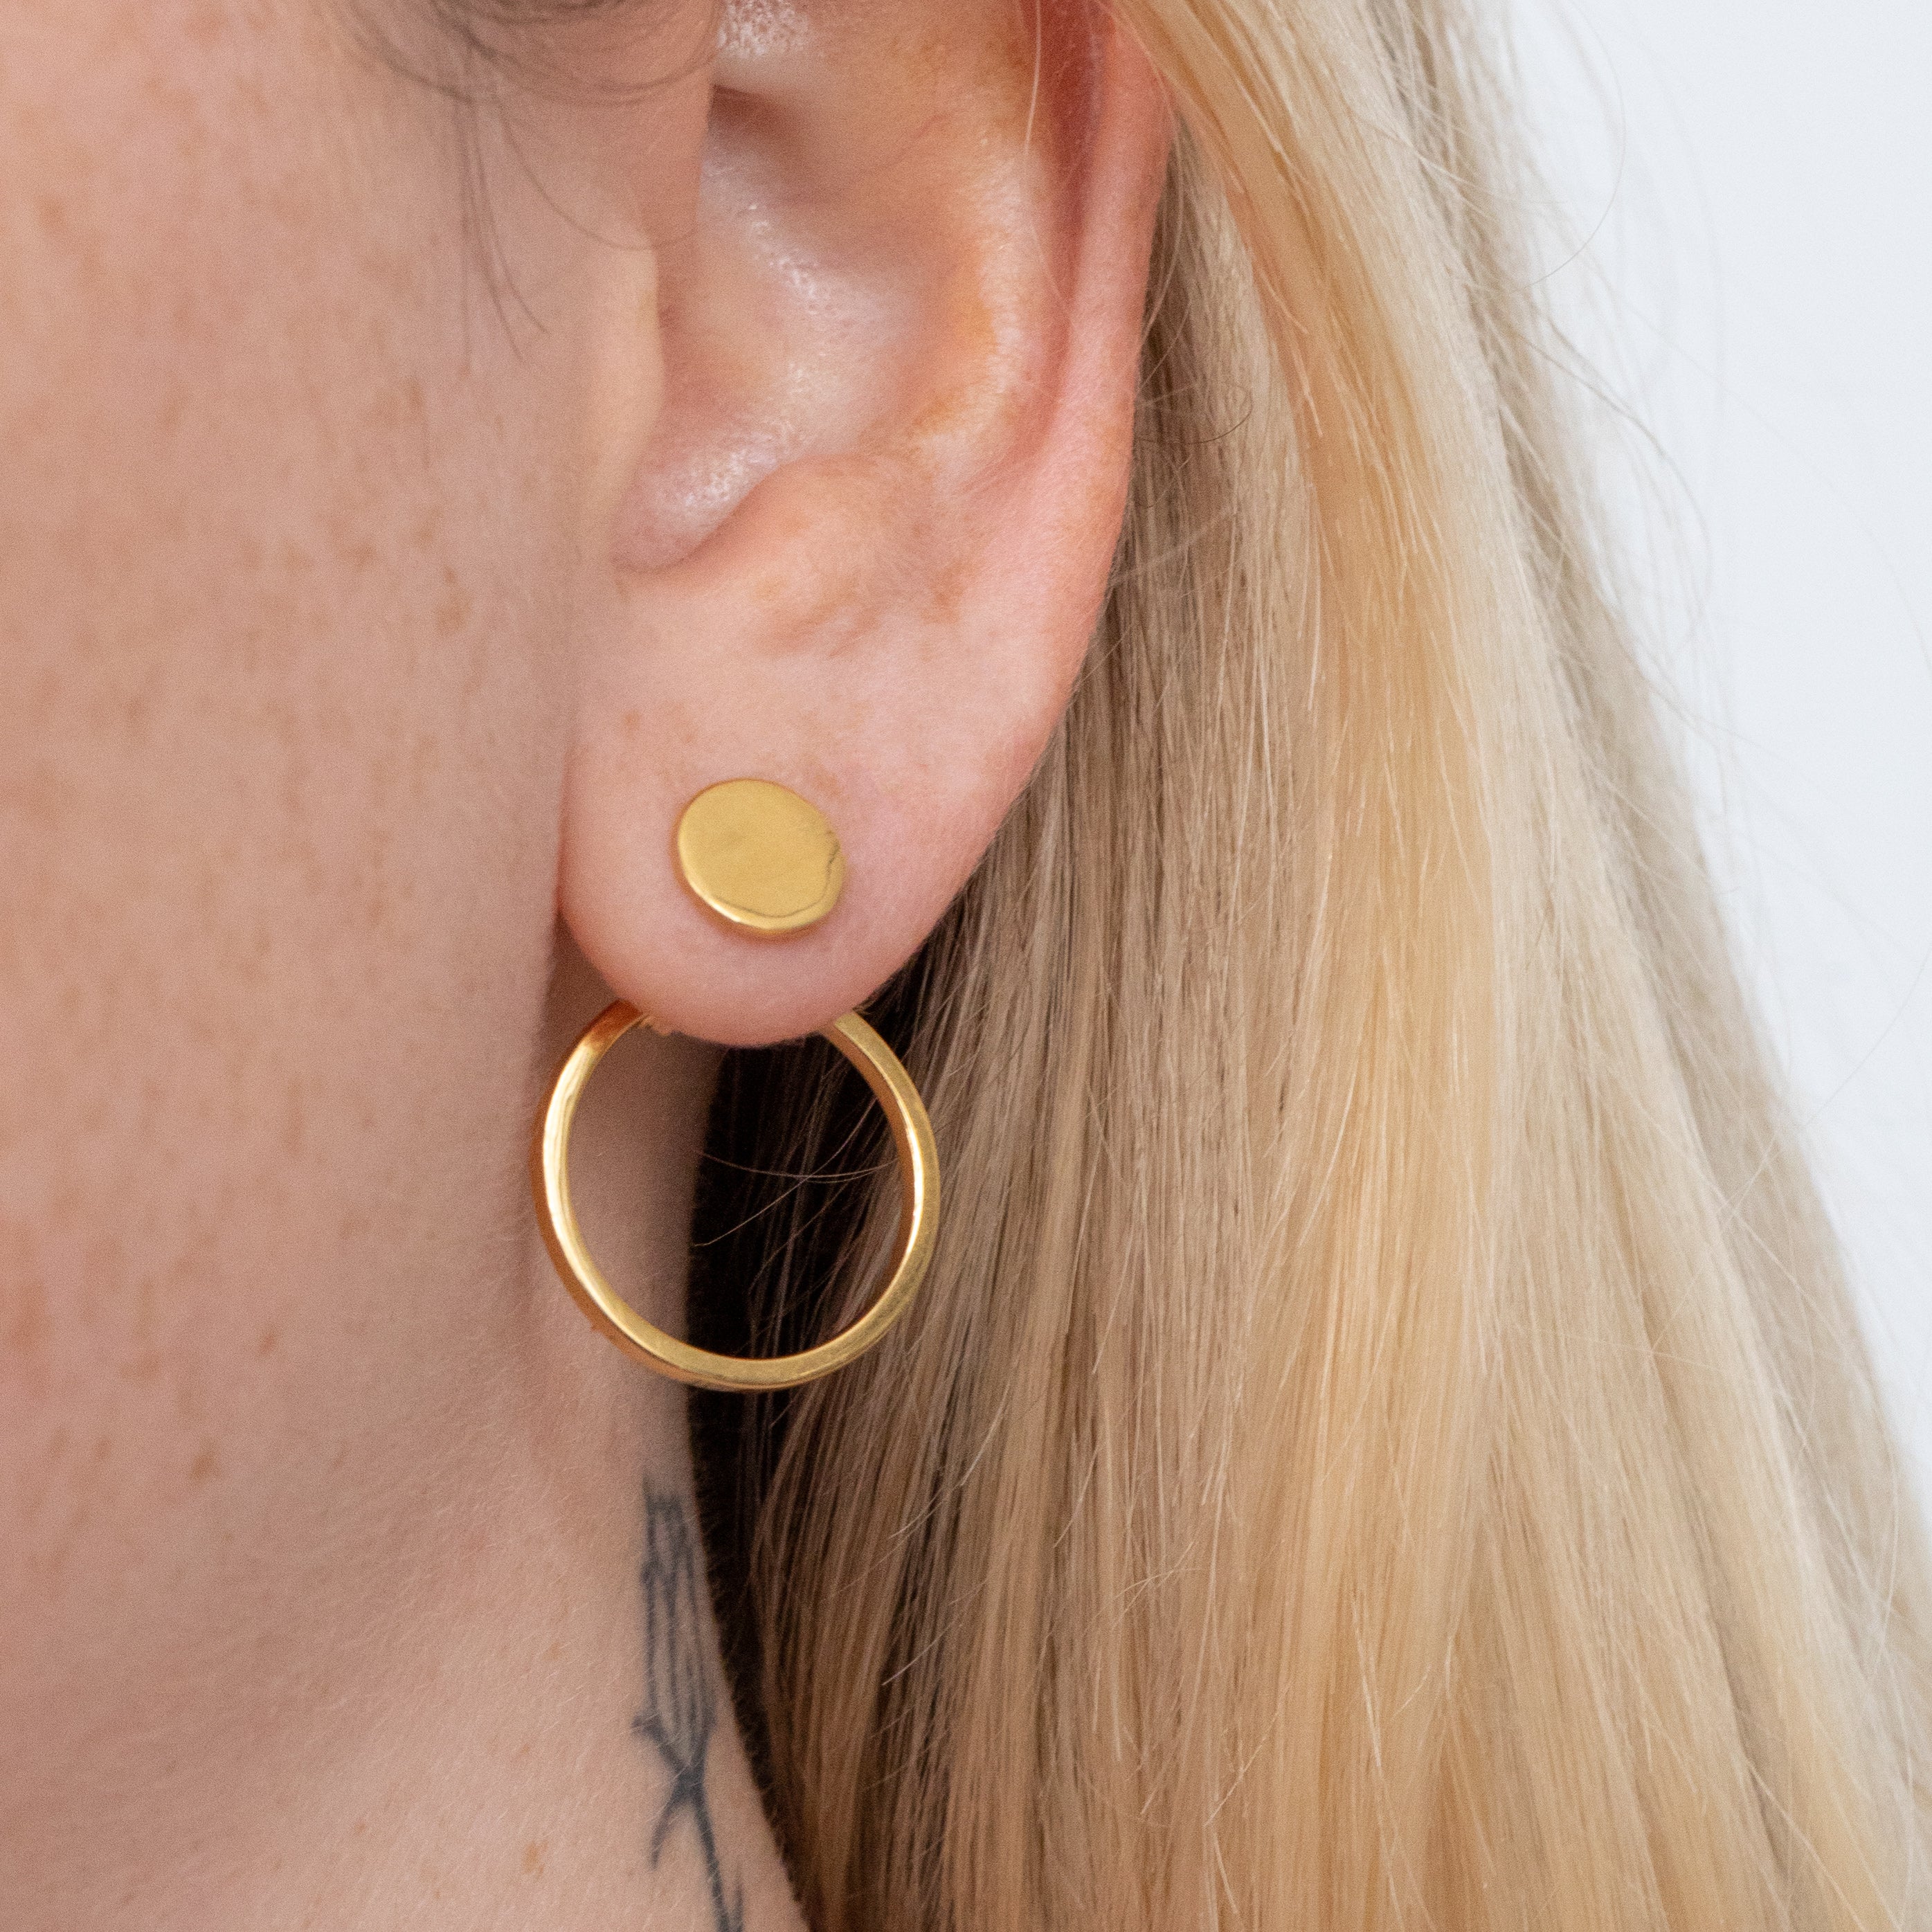 This cyclical earring with jacket is crafted from brass, a strong, durable metal that will stand up to wear over time. With its sleek design and rustic feel, it's an ideal choice for everyday wear. The earring adds a touch of simple sophistication to any outfit. Wear with or without the jacket. Pair with the Cyclical Choker Necklace to complete the look.